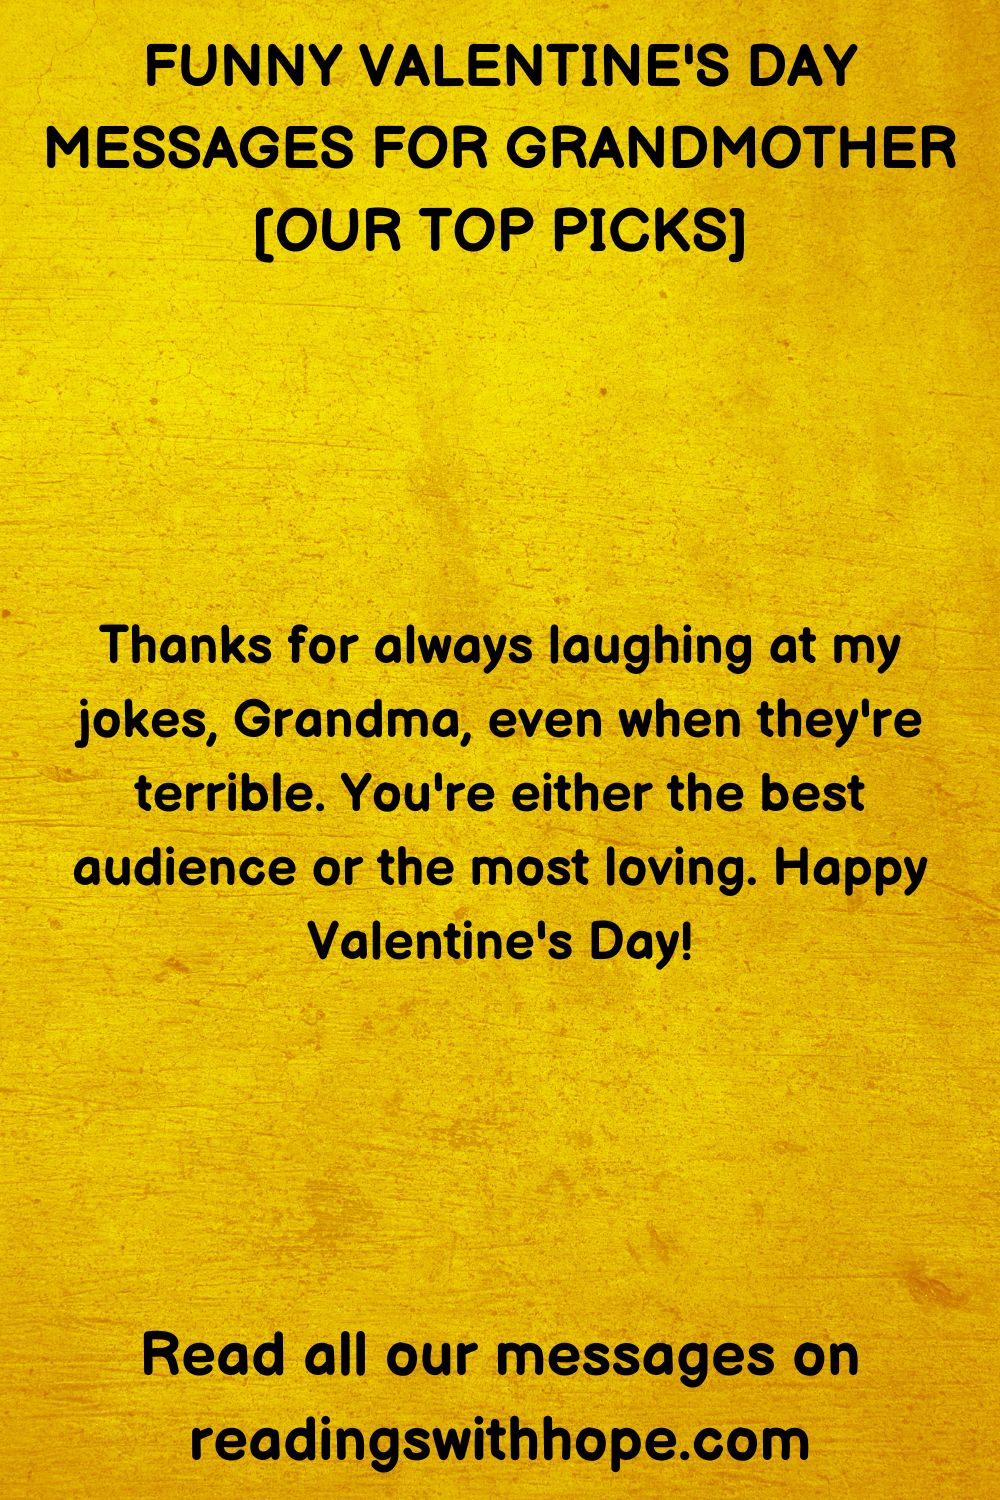 Funny Valentine's Day Messages for Grandmother